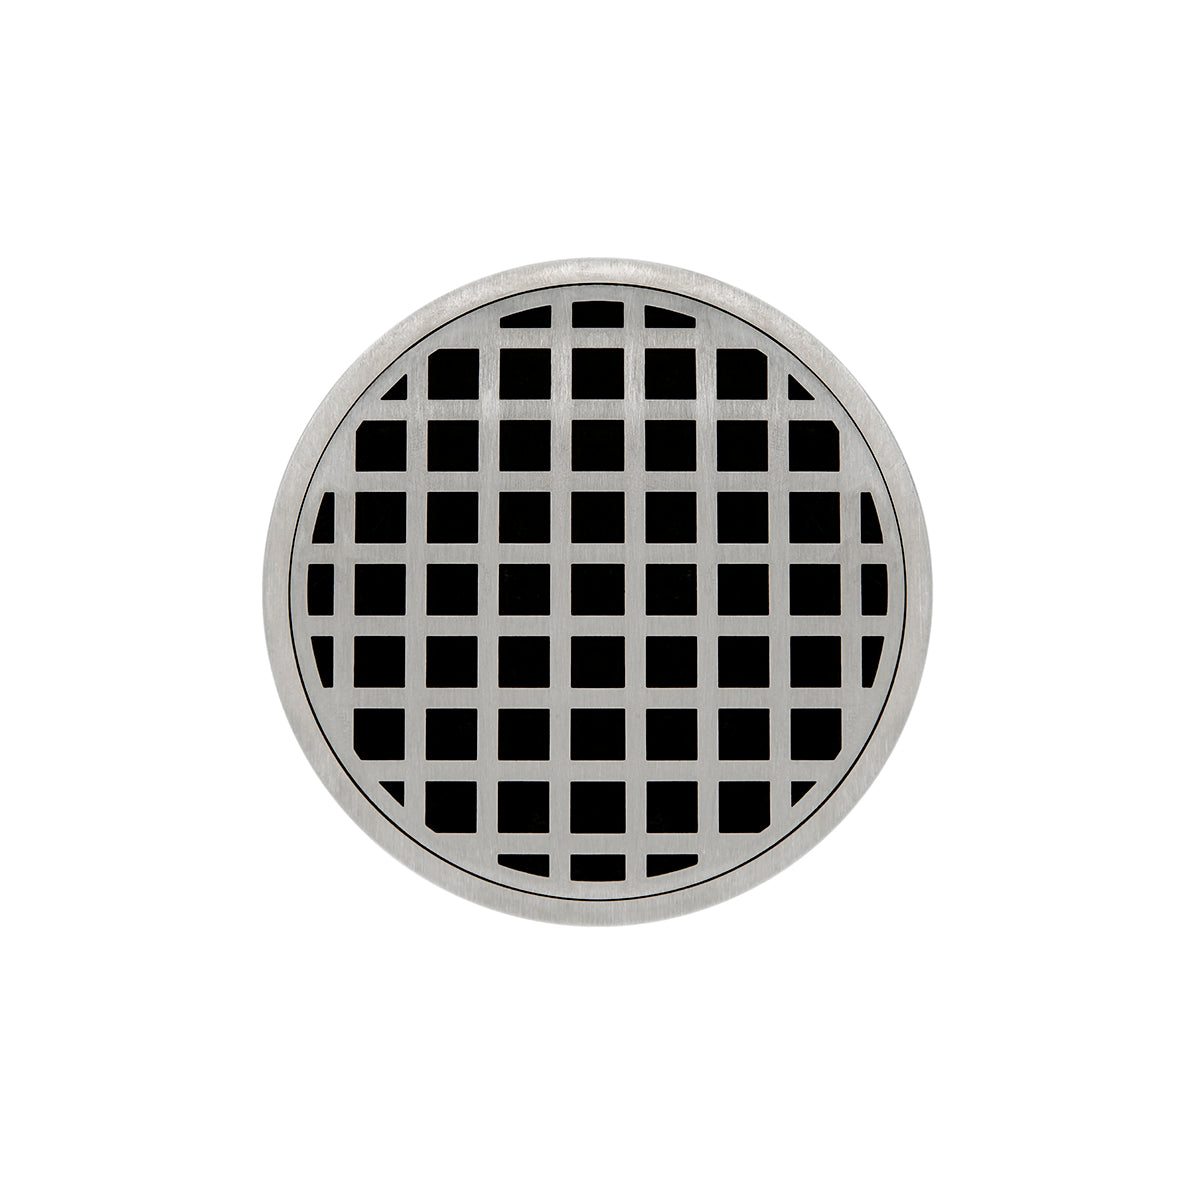 Infinity Drain 5" Round RQDB 5 Premium Center Drain Kit with Squares Pattern Decorative Plate with Stainless Steel Bonded Flange Drain Body, 2" No Hub Outlet